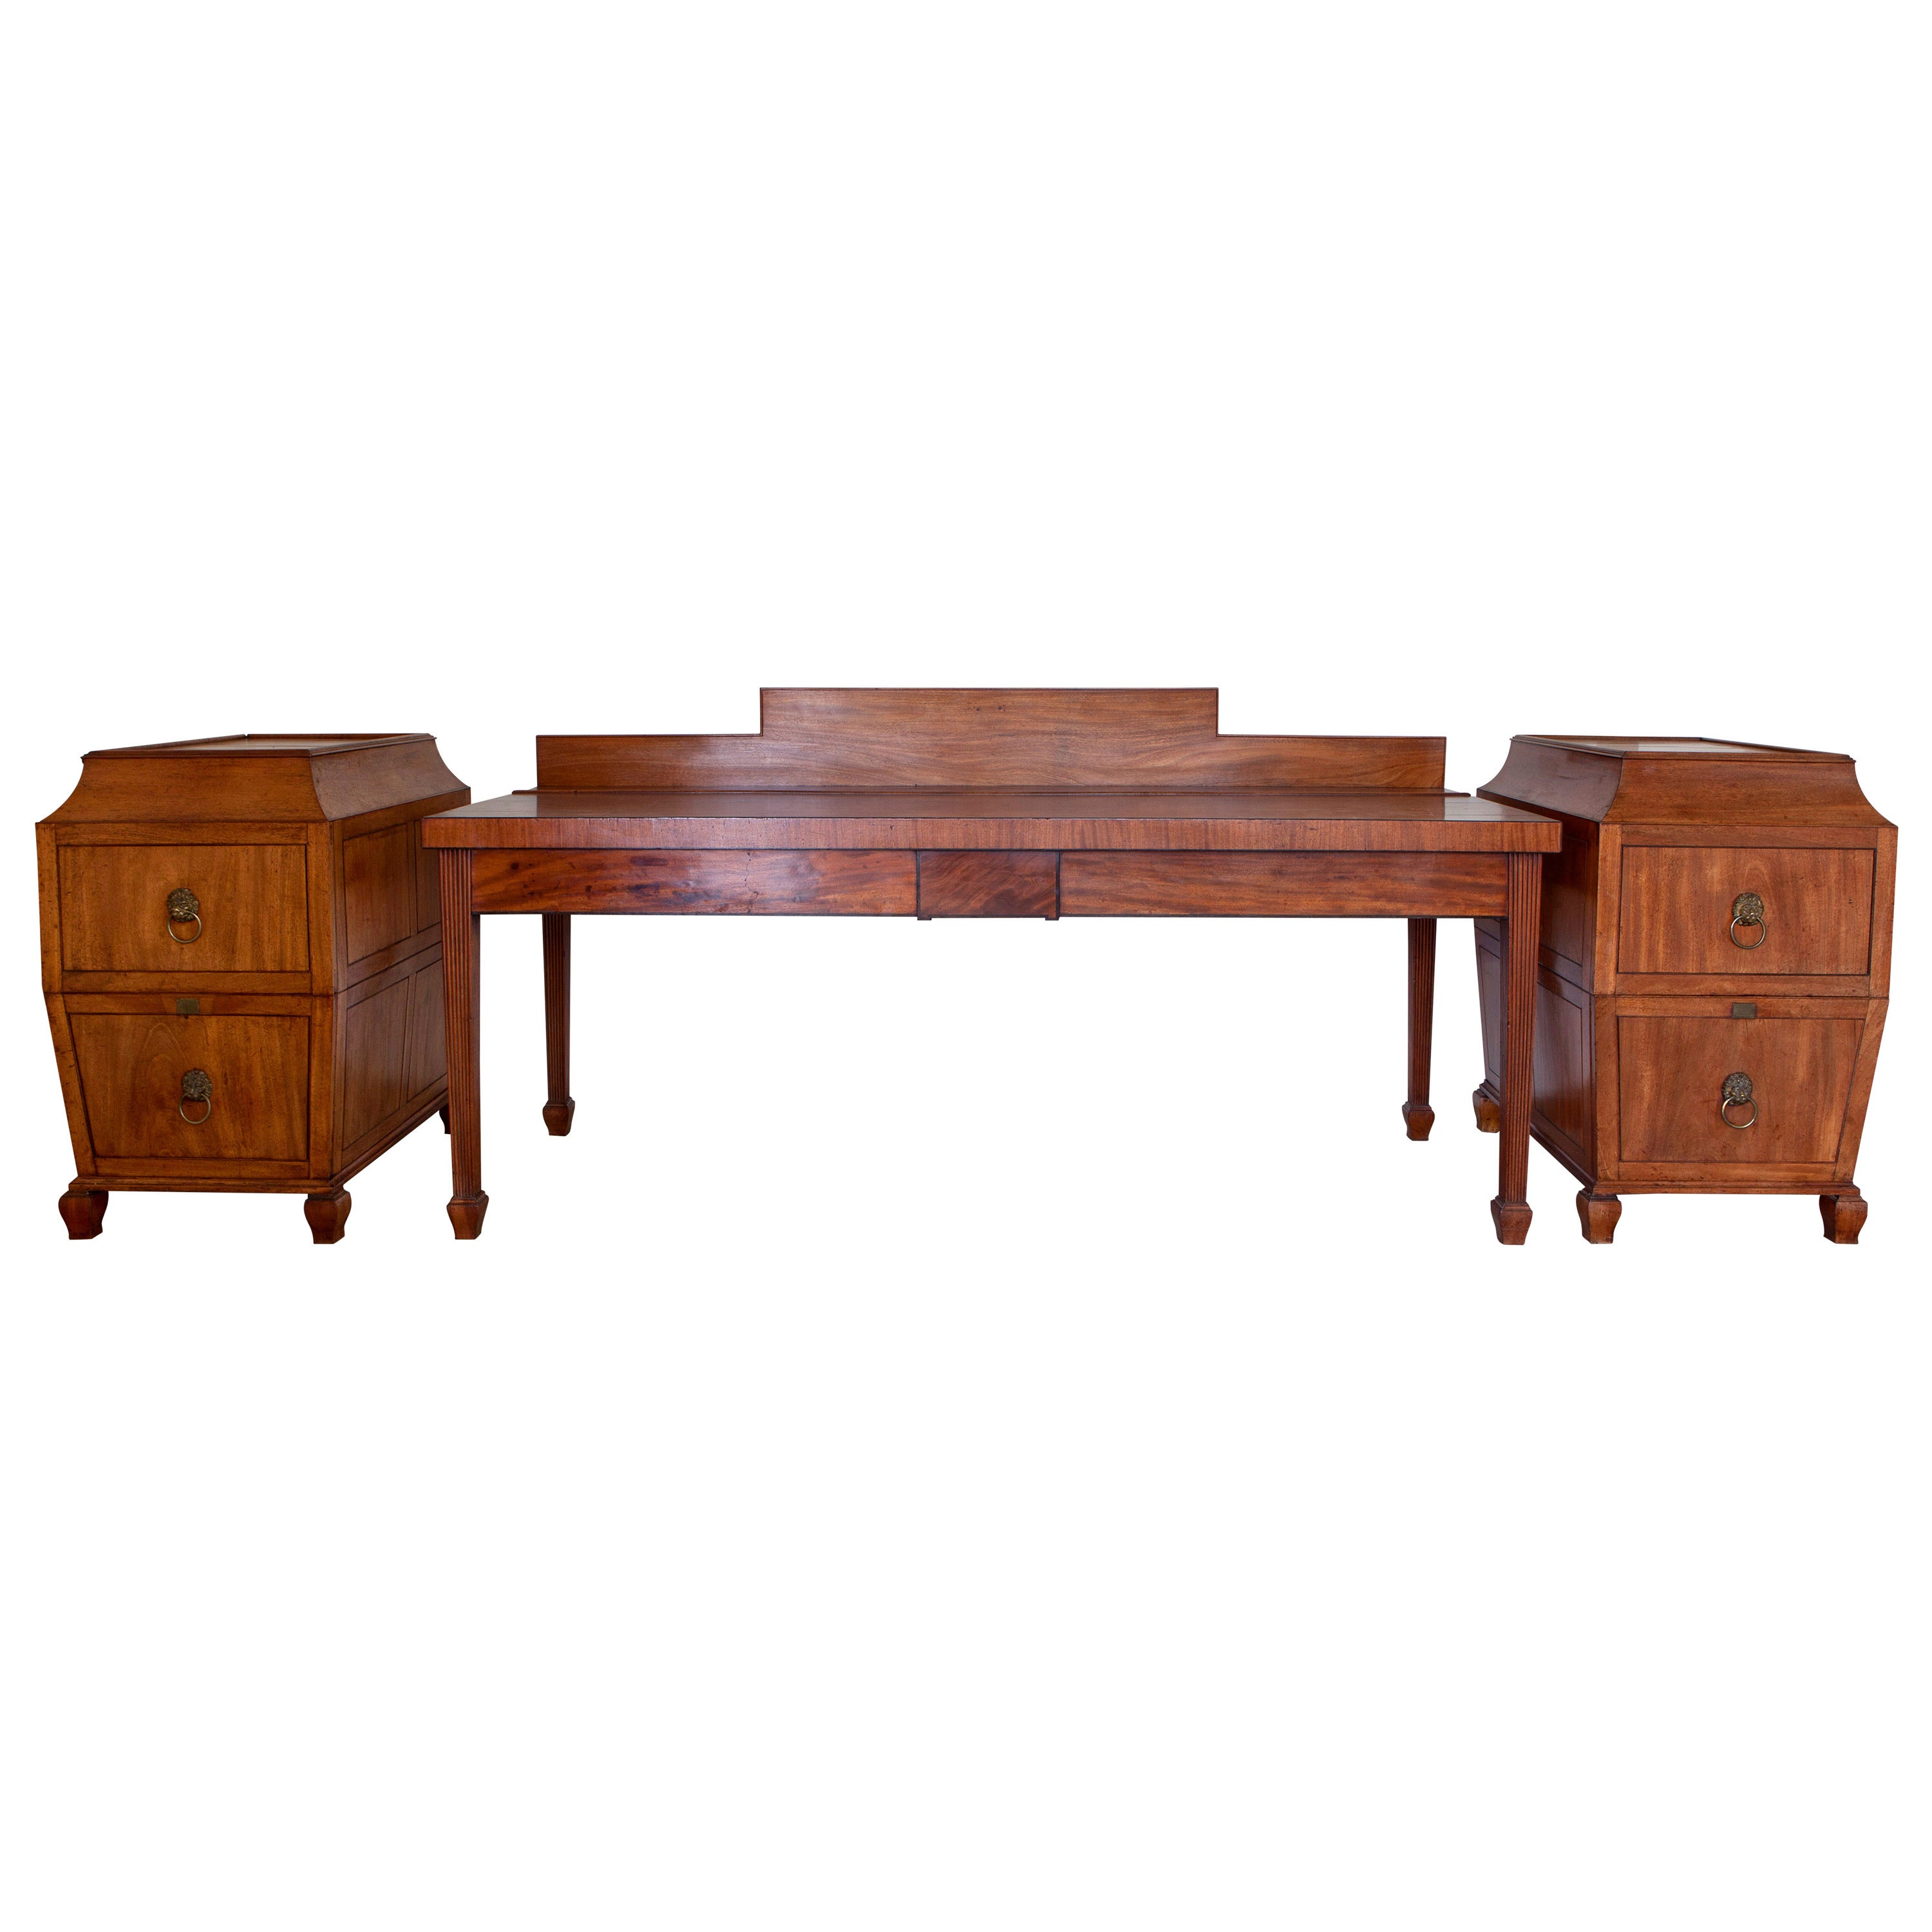 Pair of Mahogany Wine Coolers and Serving Table, circa 1810 For Sale